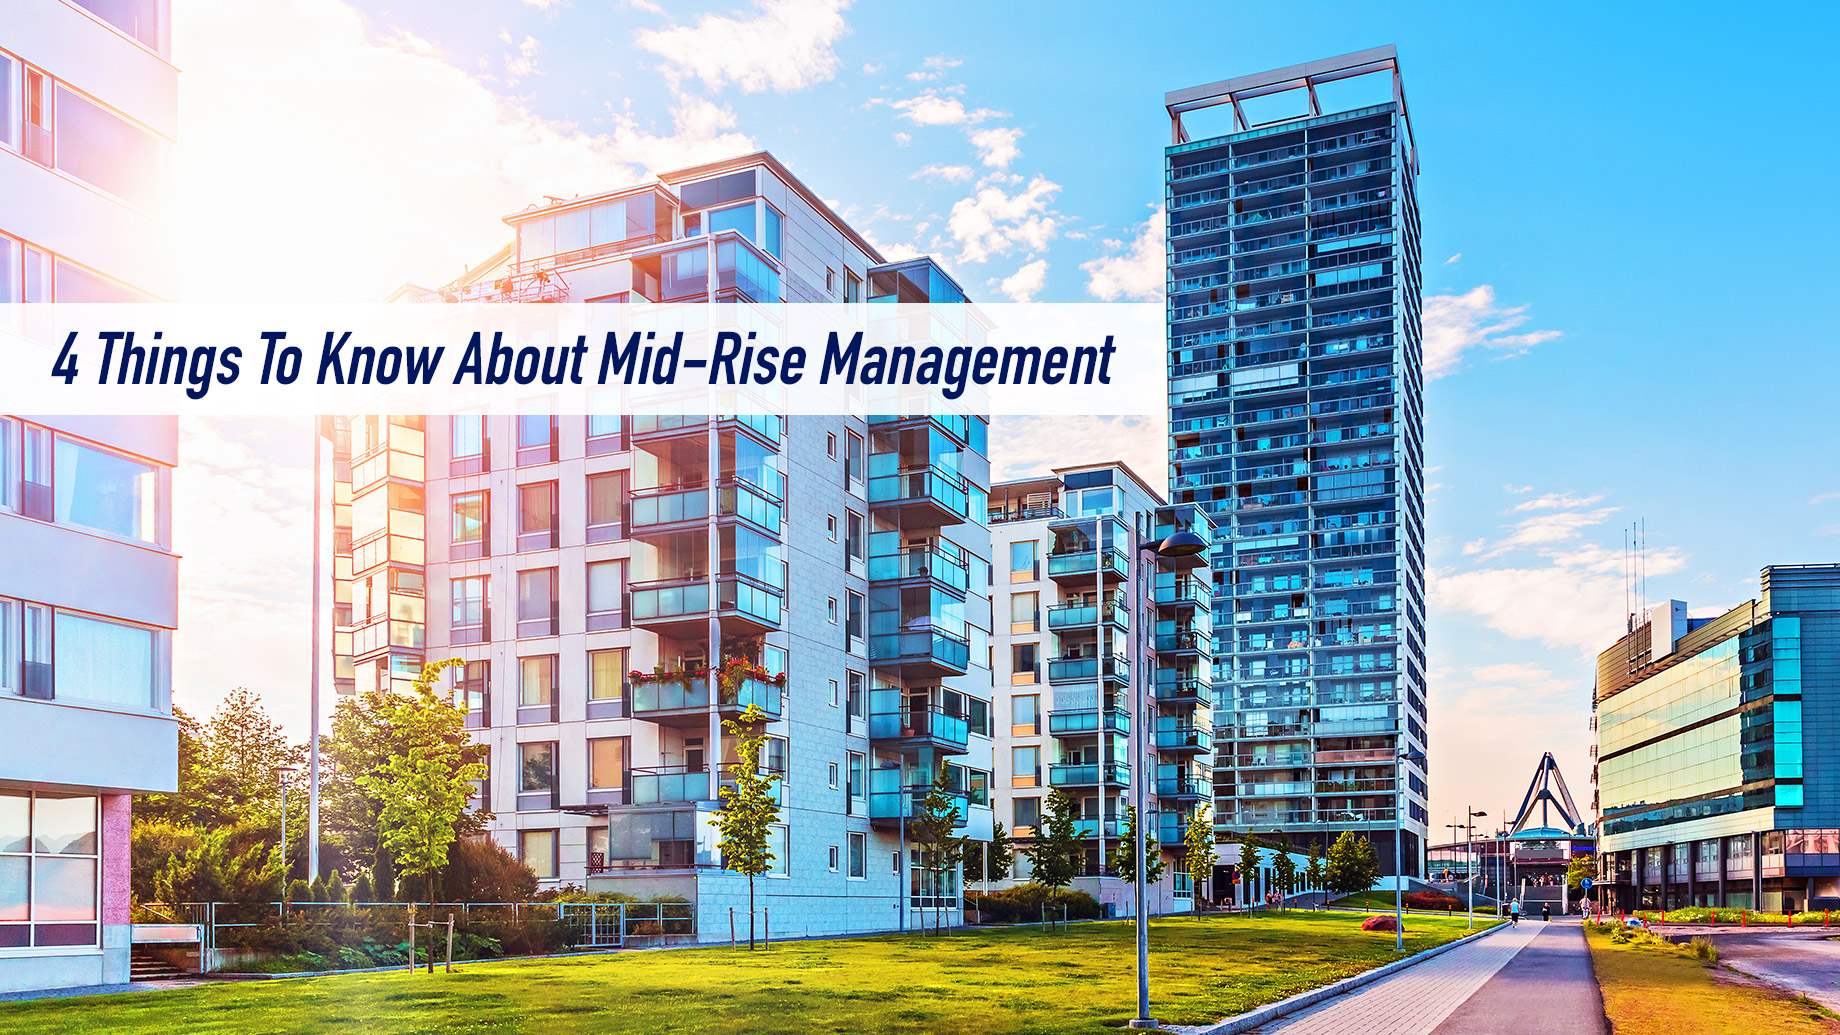 Mid-Rise Urban Living 101 - 4 Things To Know About Mid-Rise Management